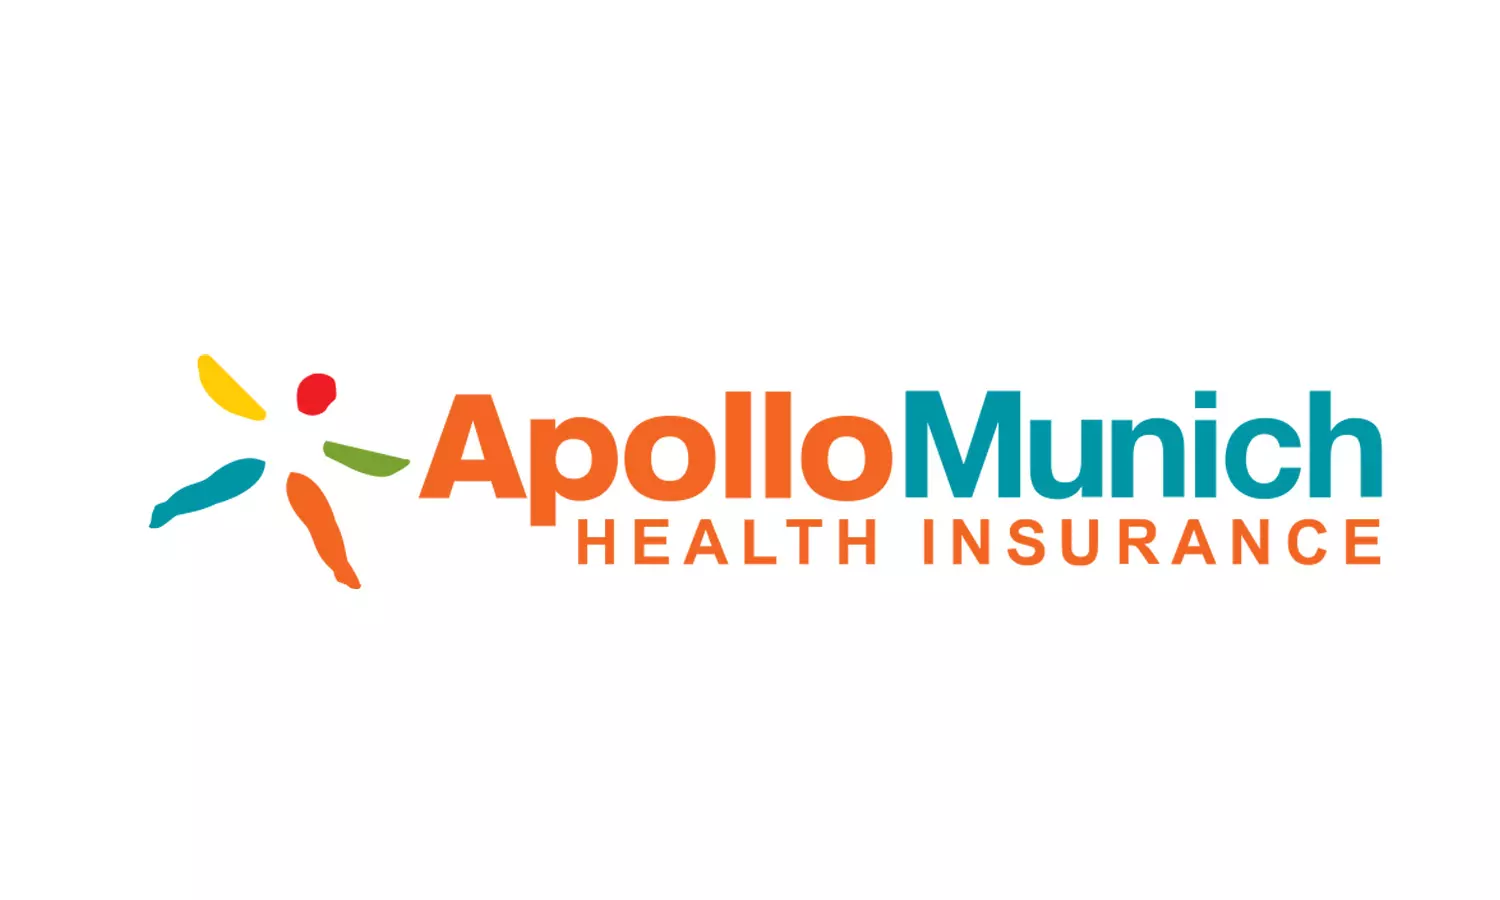 No Nexus With Prior Disease, Chandigarh District Commission Holds Apollo Munich Health Insurance Co. Liable For Repudiating Claim Based On Non-Disclosure